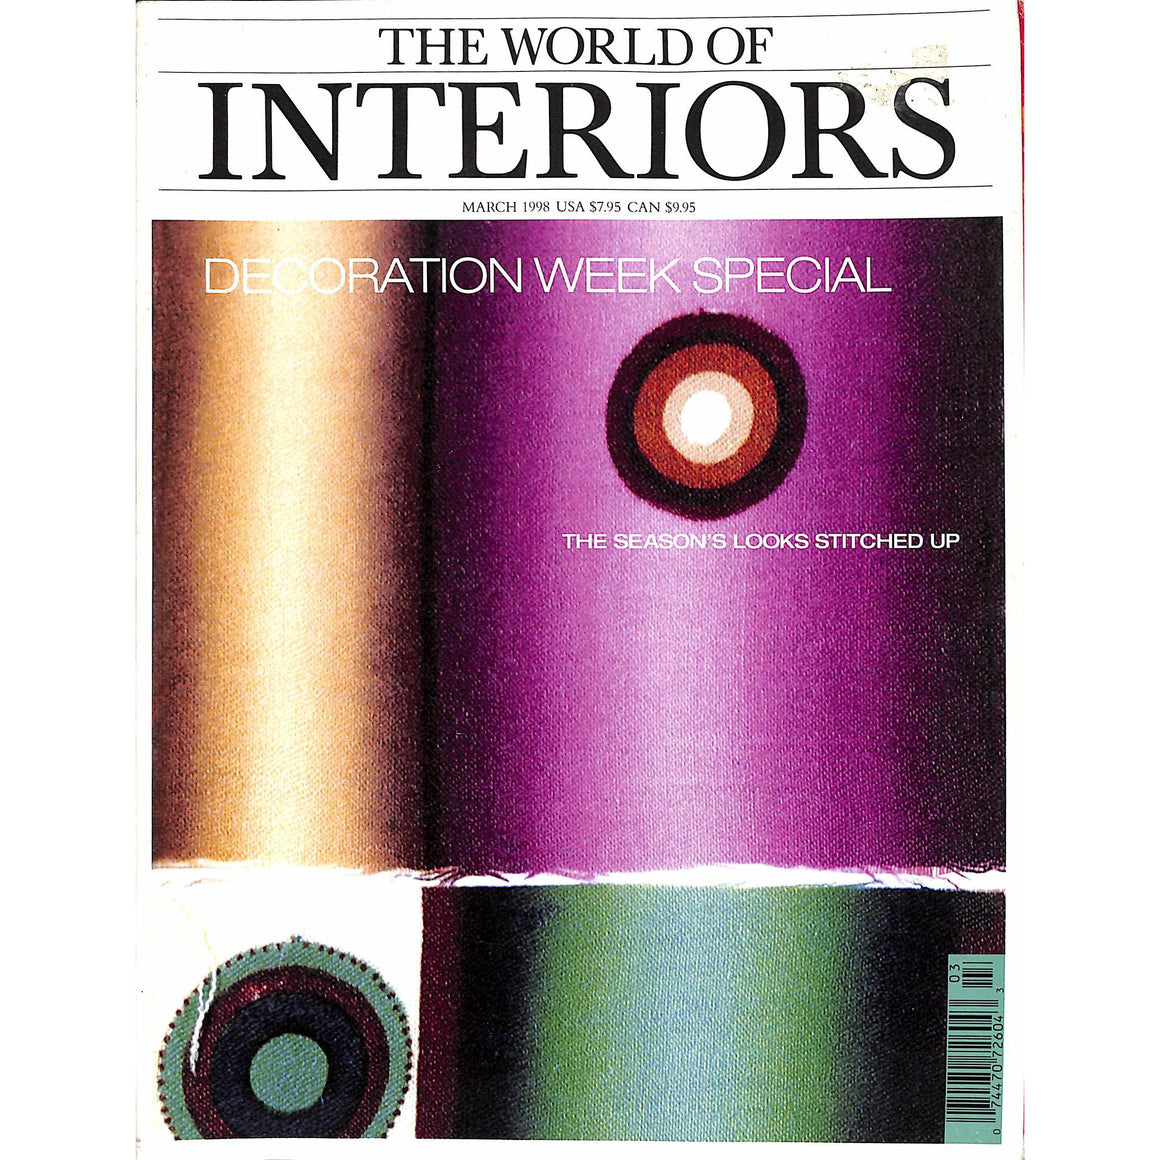 "The World Of Interiors" March 1998 (SOLD)